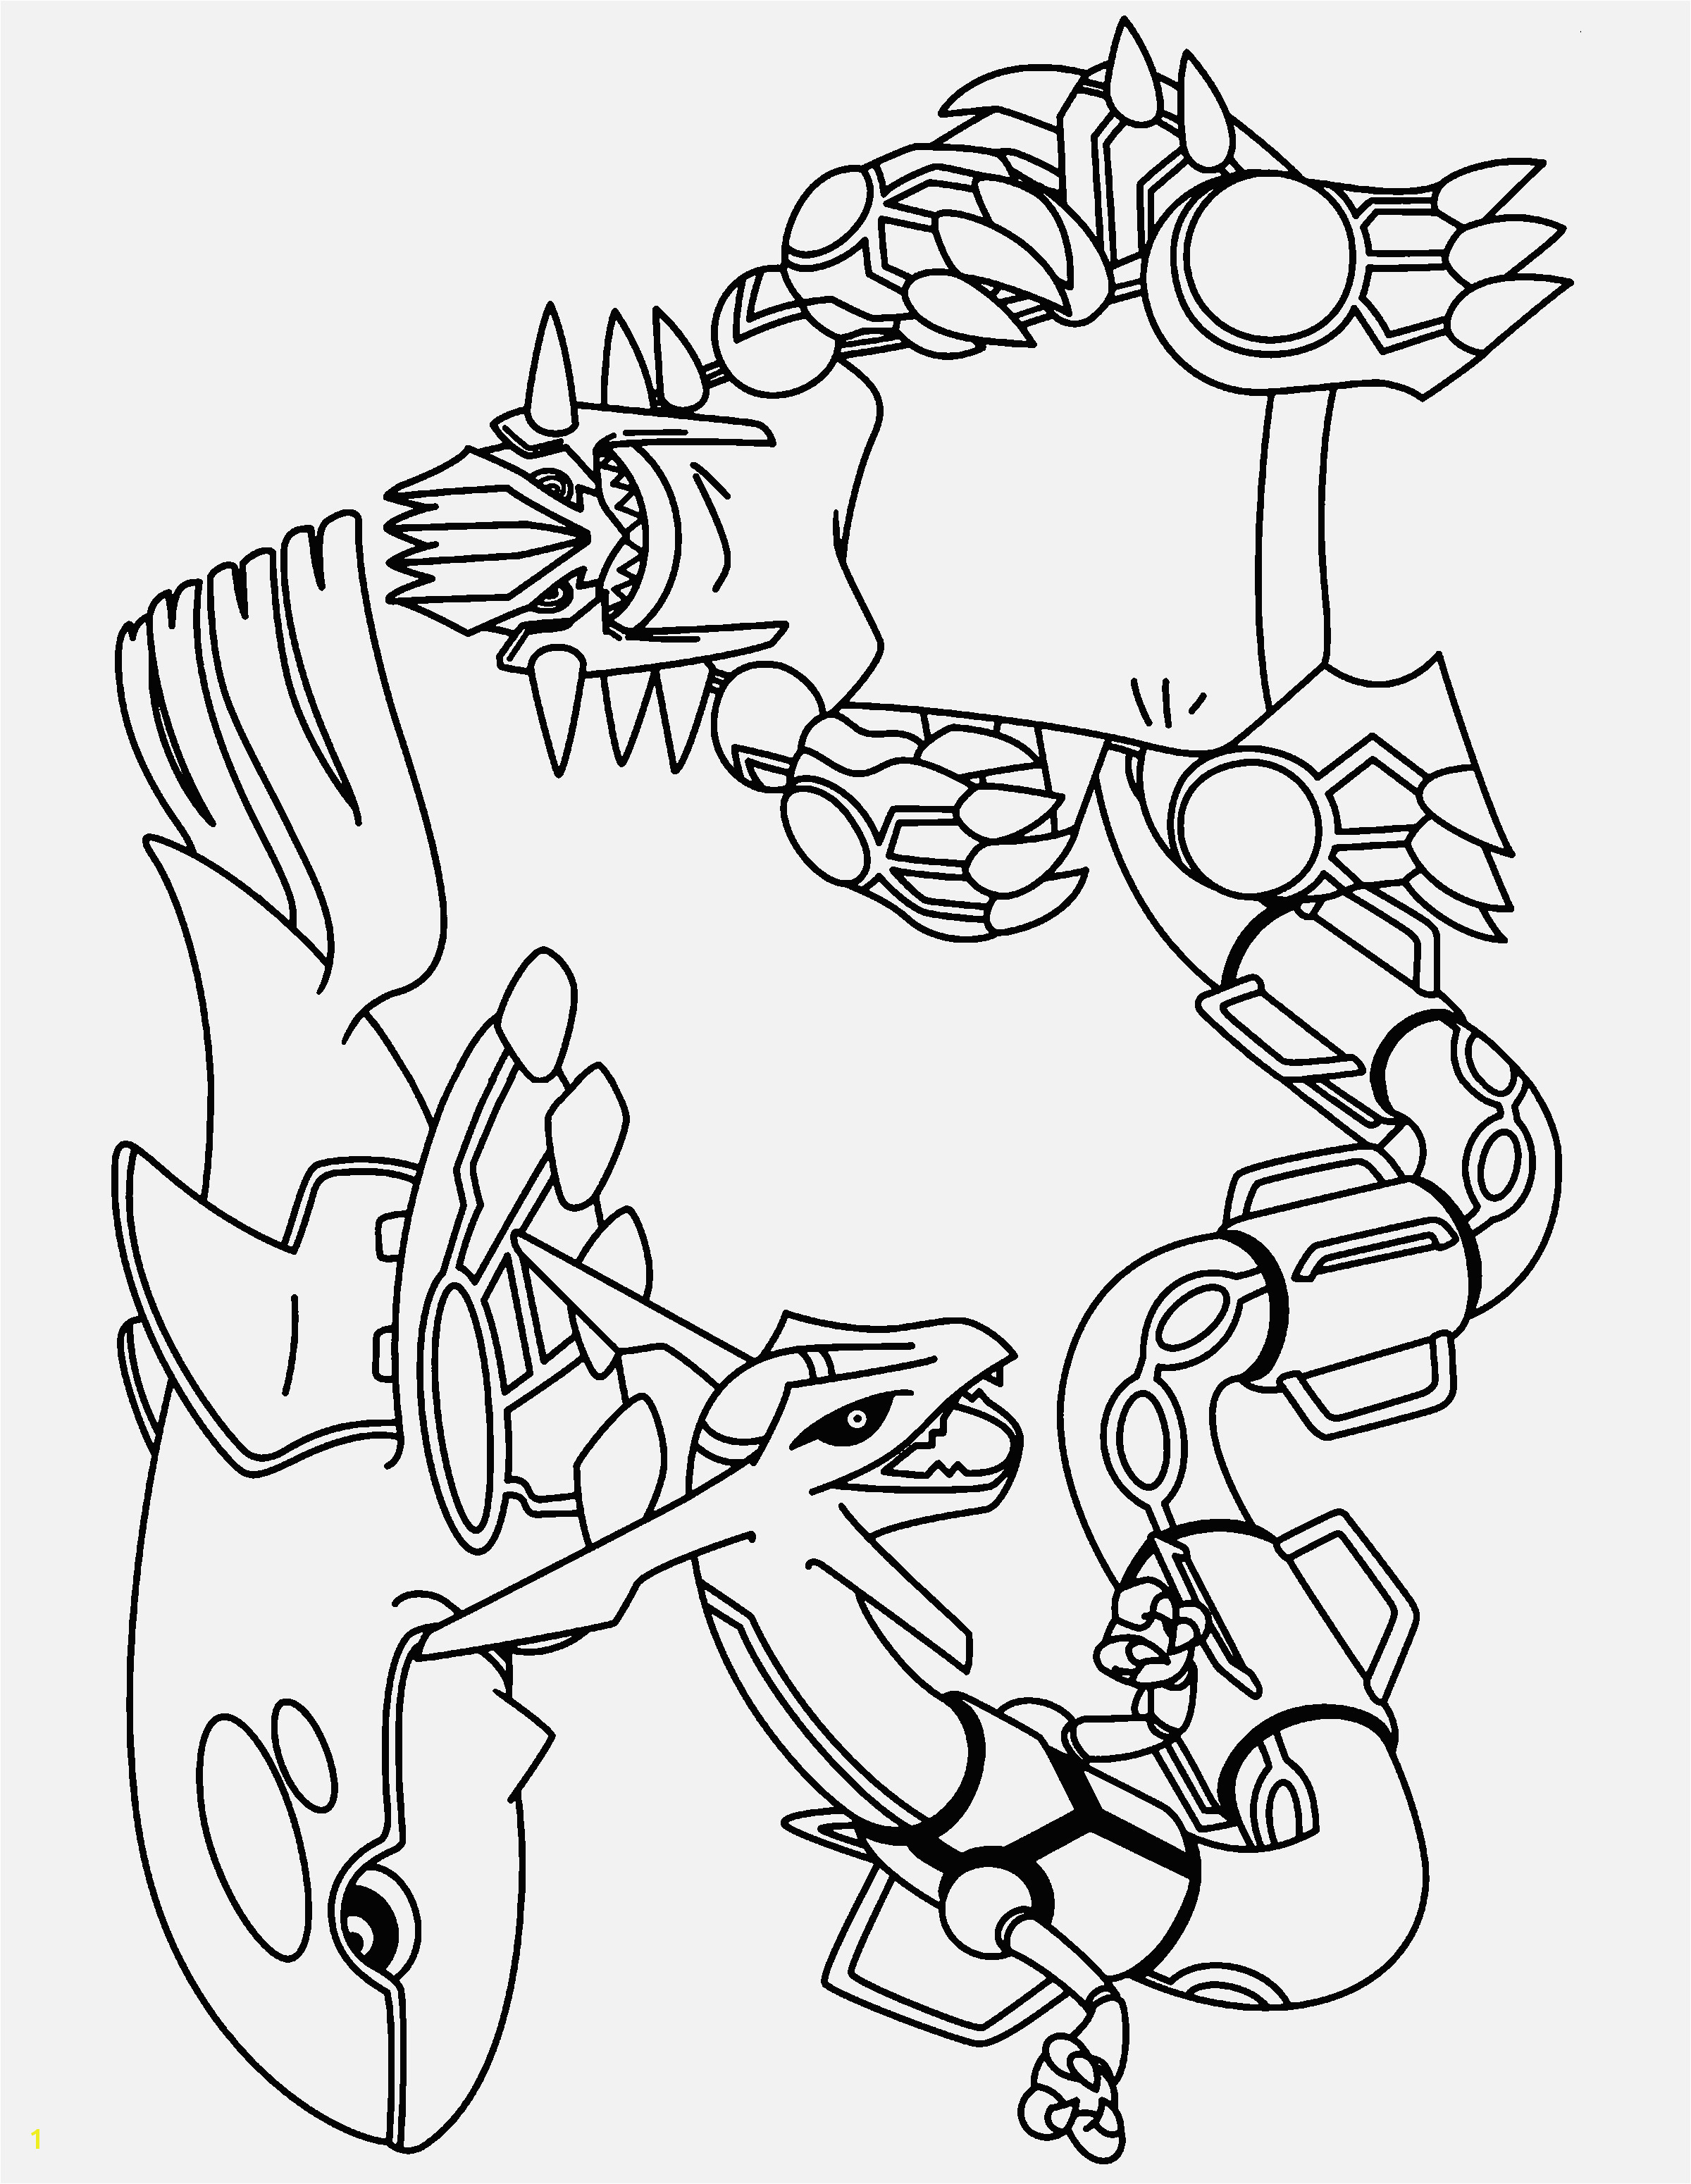 Blastoise Coloring Page Easy and Fun Blastoise Coloring Page Awesome tortank Pokemonkleurplaten Blastoise Coloring Page